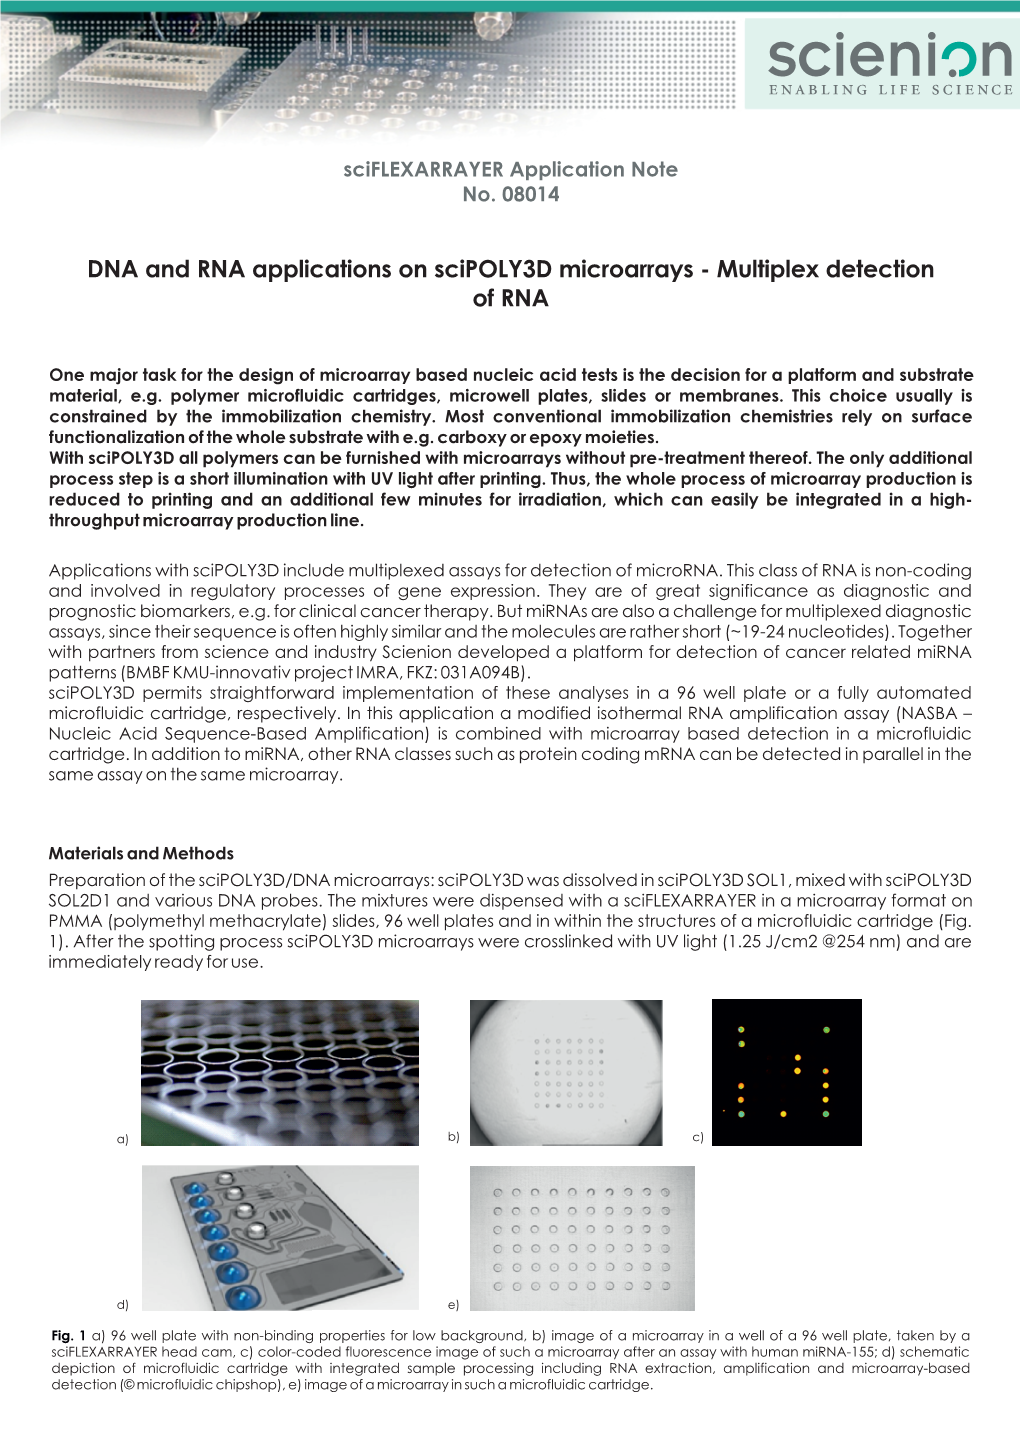 DNA and RNA Applications on Scipoly3d Microarrays - Multiplex Detection of RNA